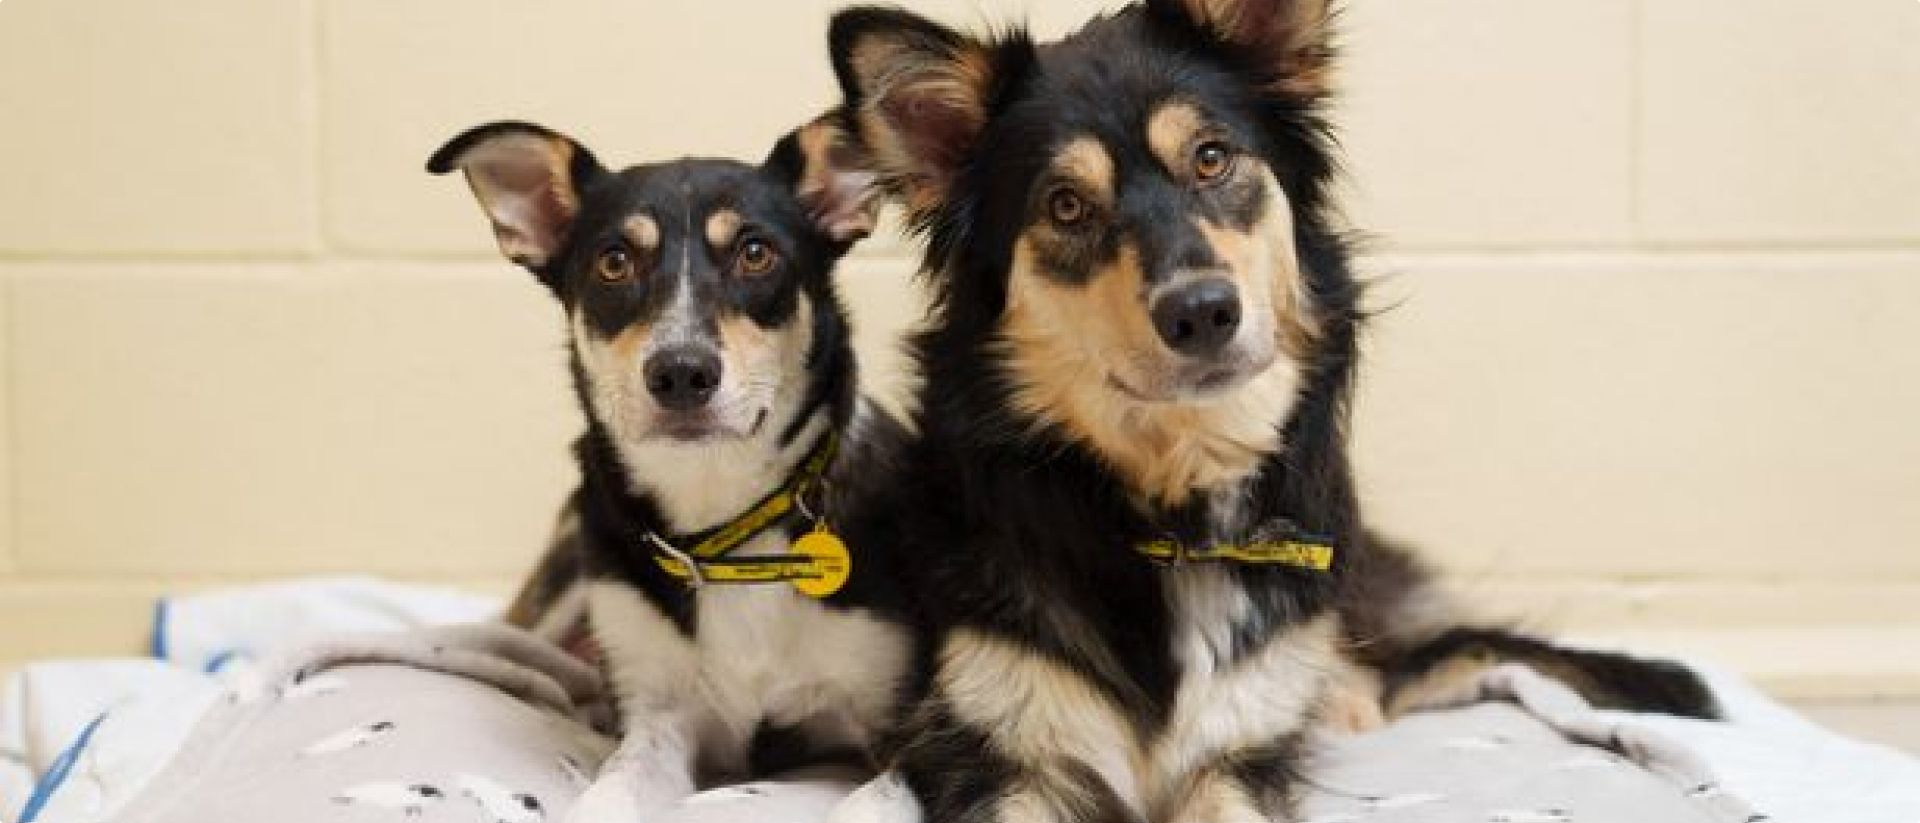 ISPCA-two_dogs_for_adoption-news